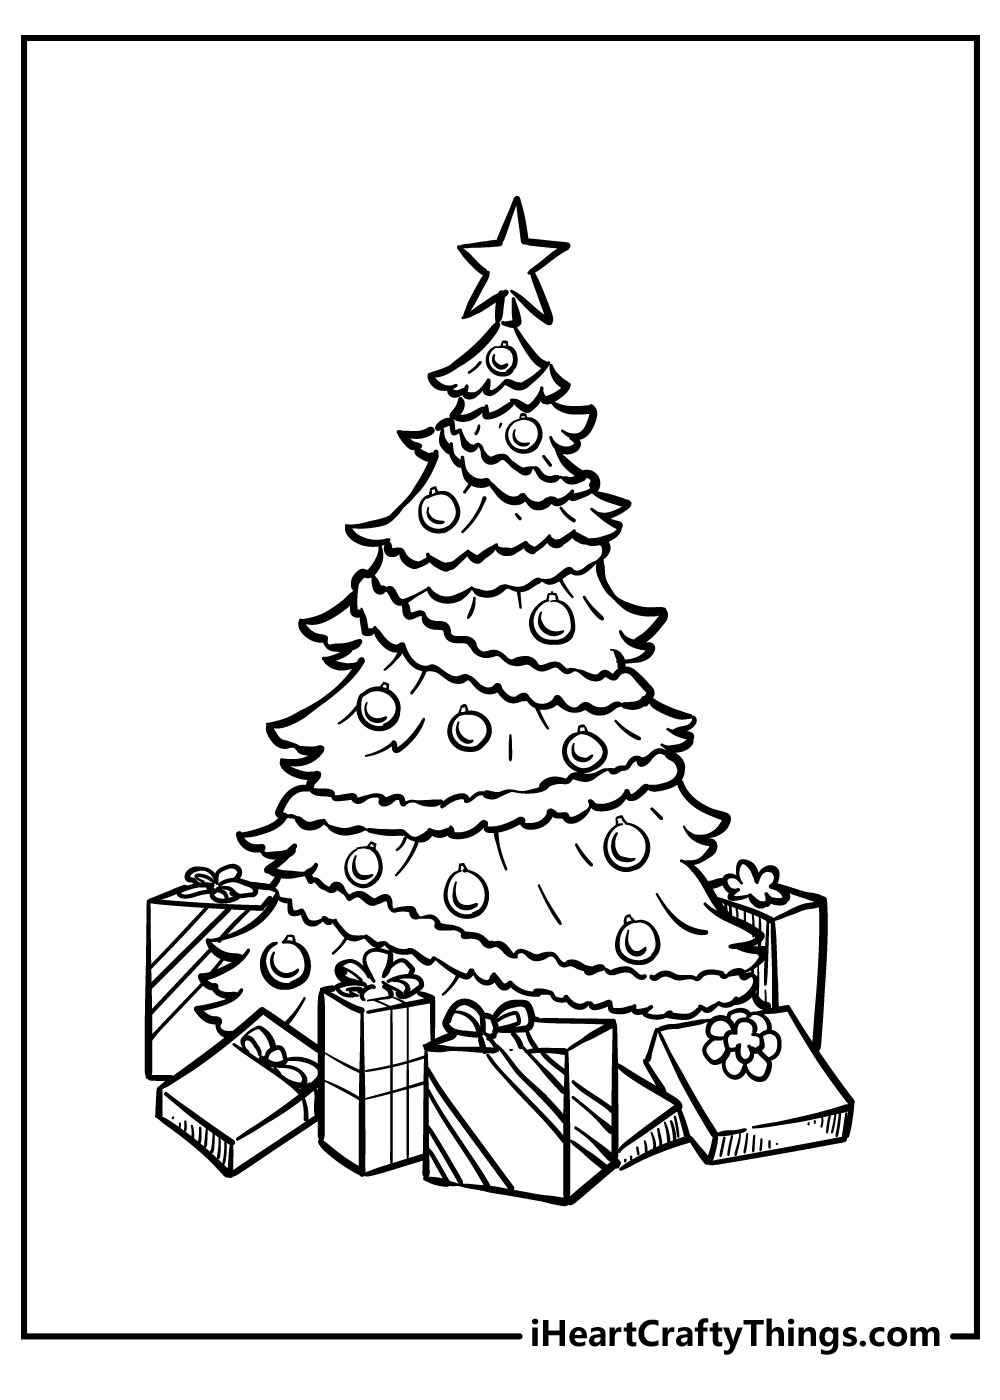 Christmas Tree Coloring Pages Updated 20